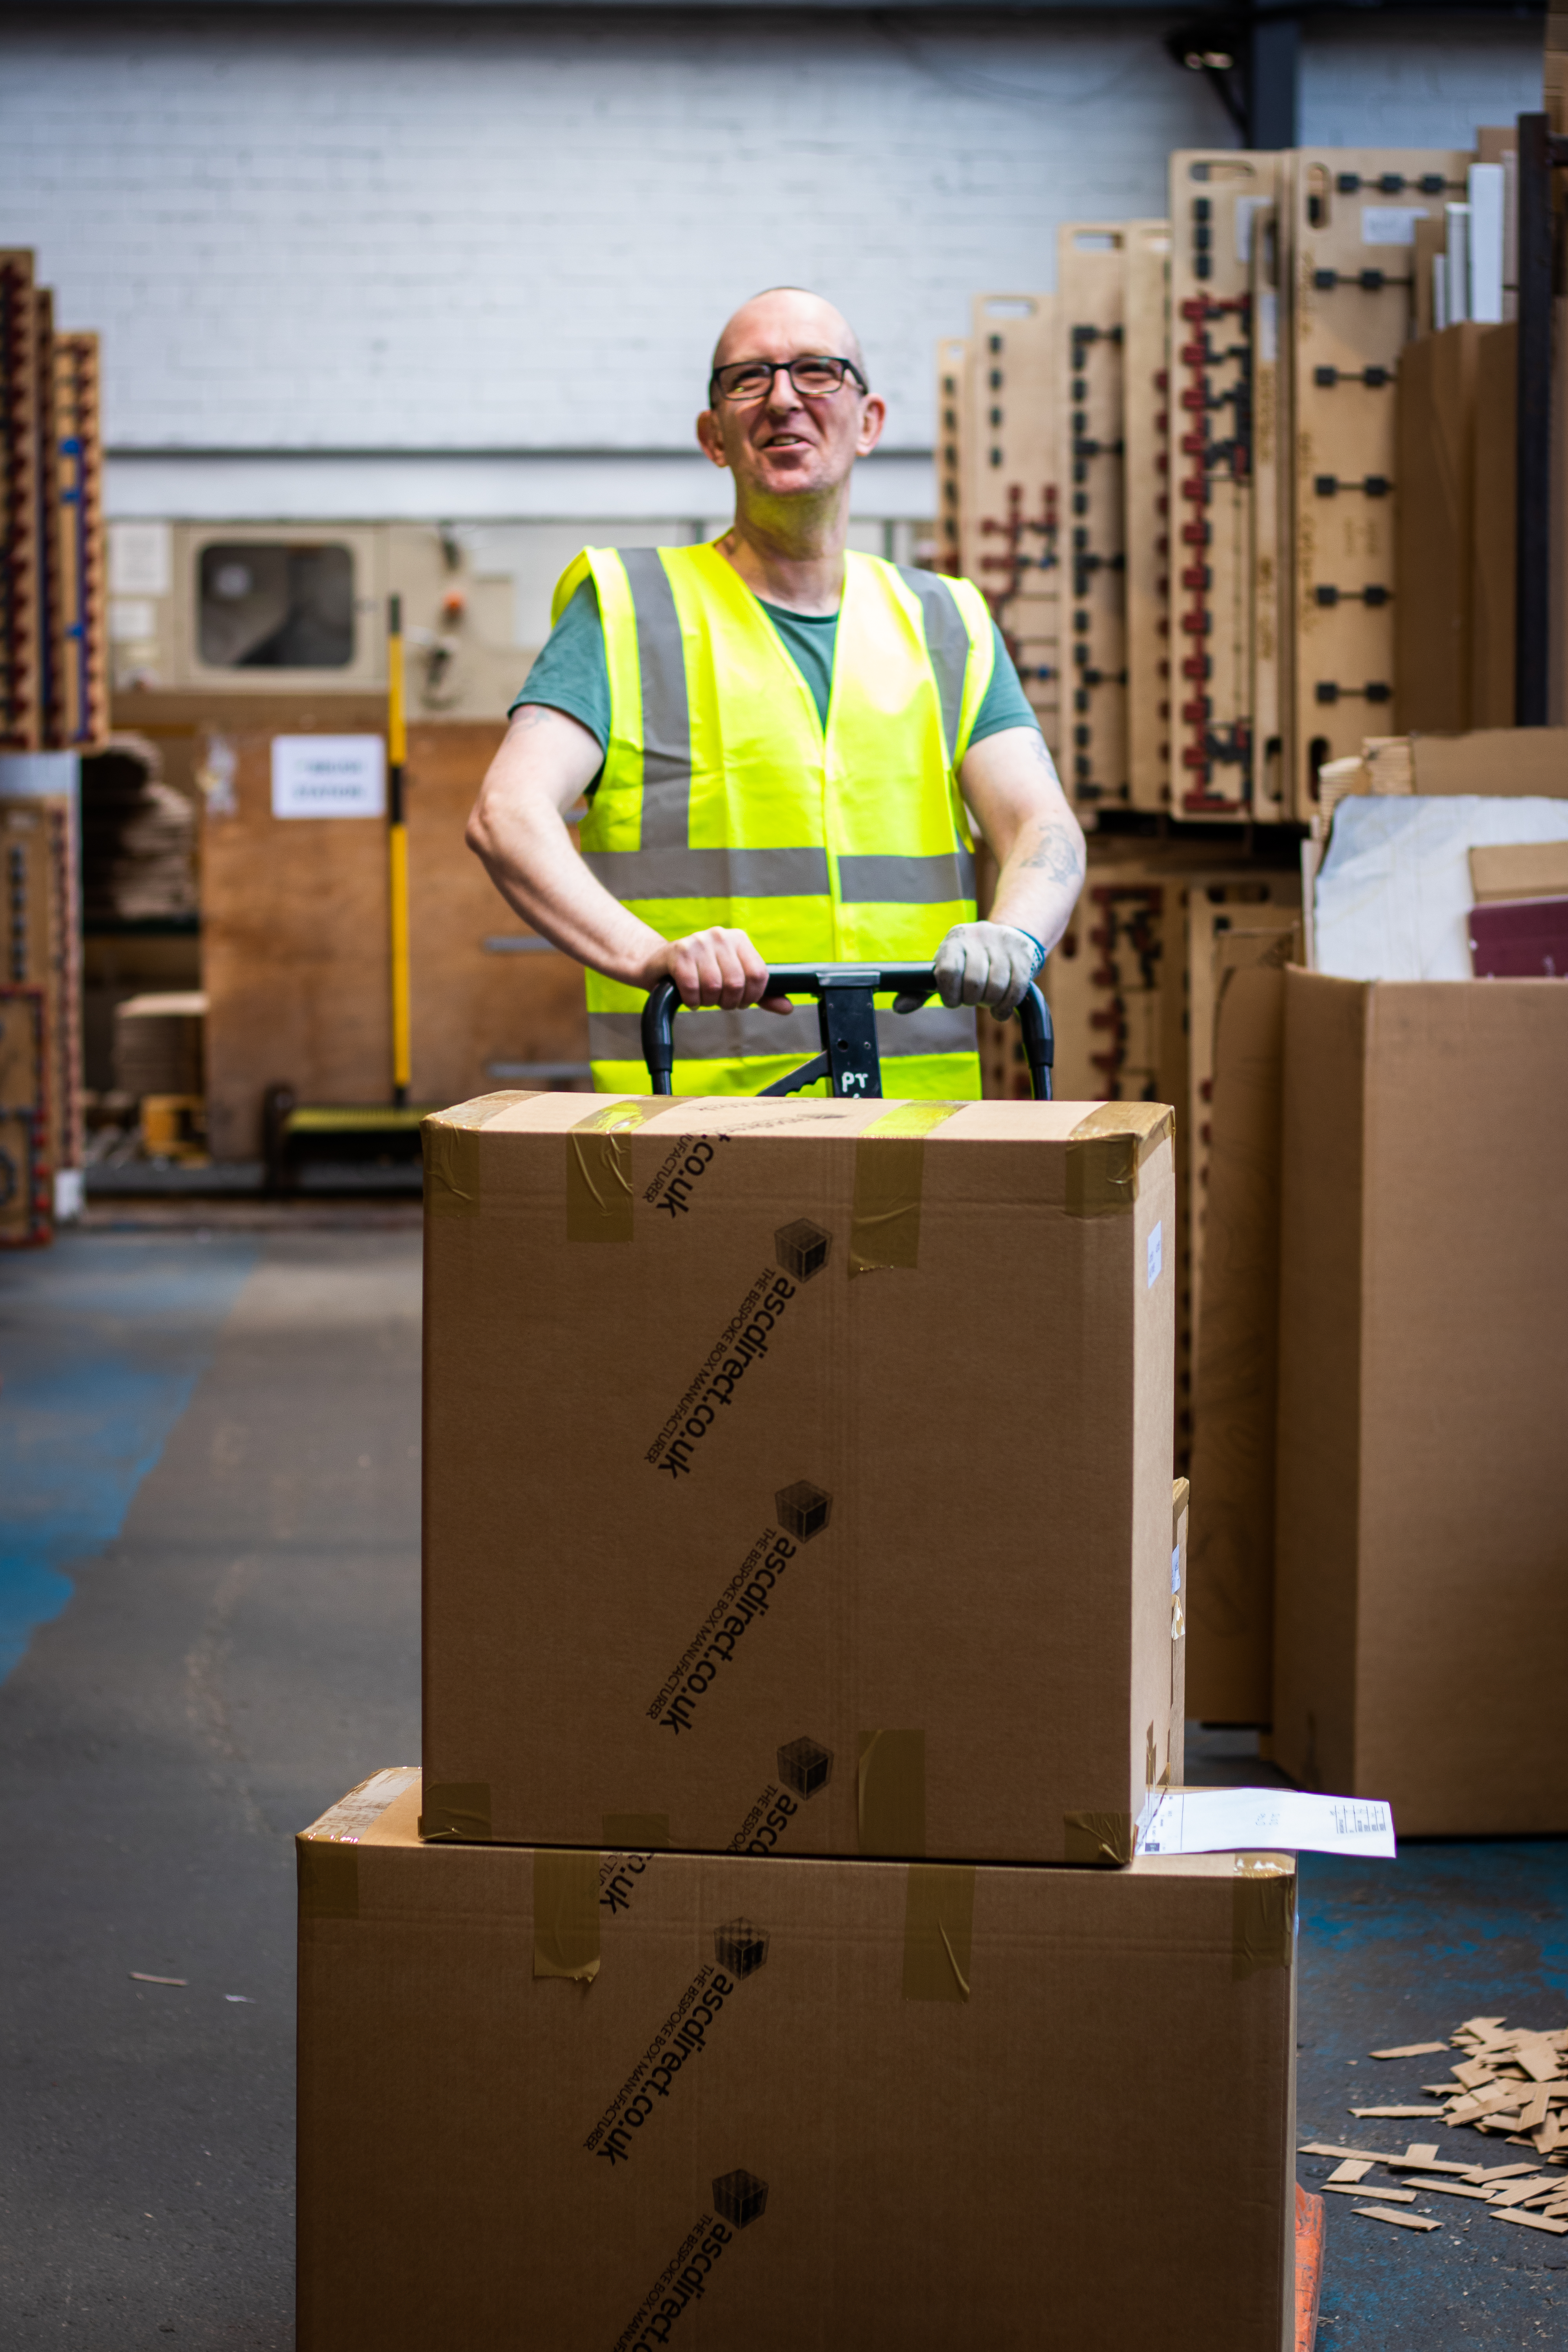 Smiling white male warehouse staff member pushing ascdirect.co.uk labelled boxes on a trolley